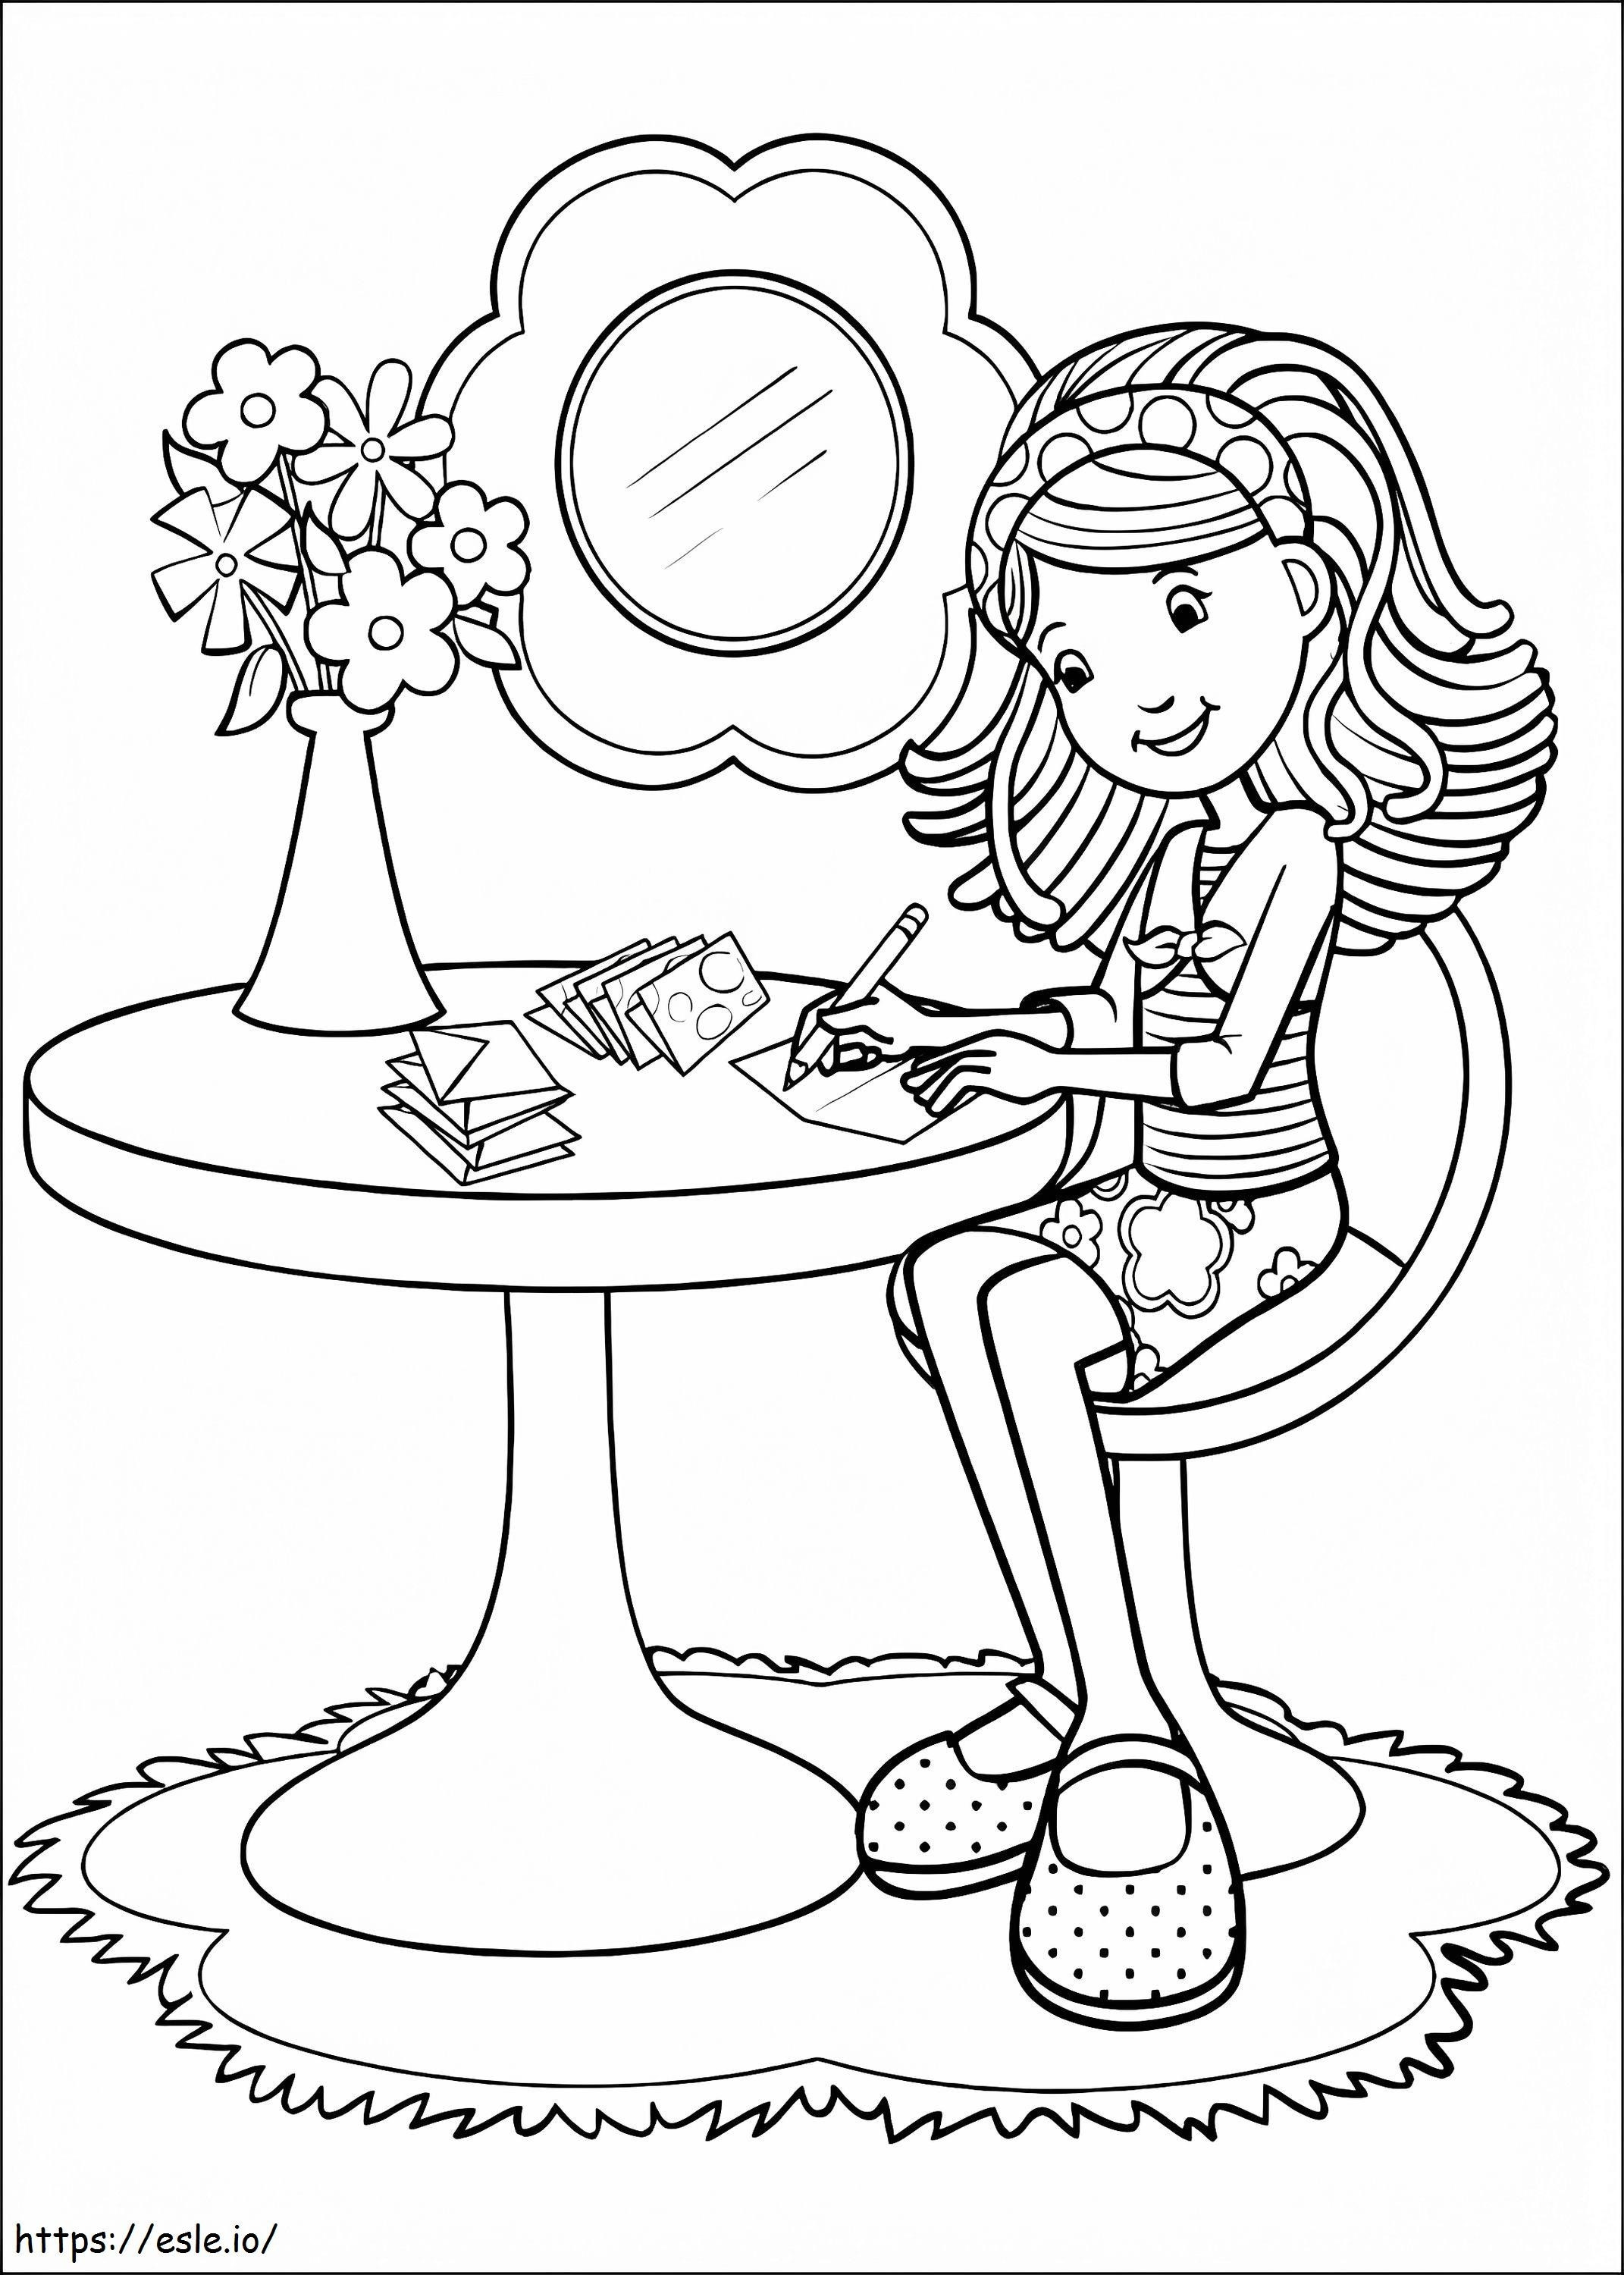 Groovy Girls 9 coloring page